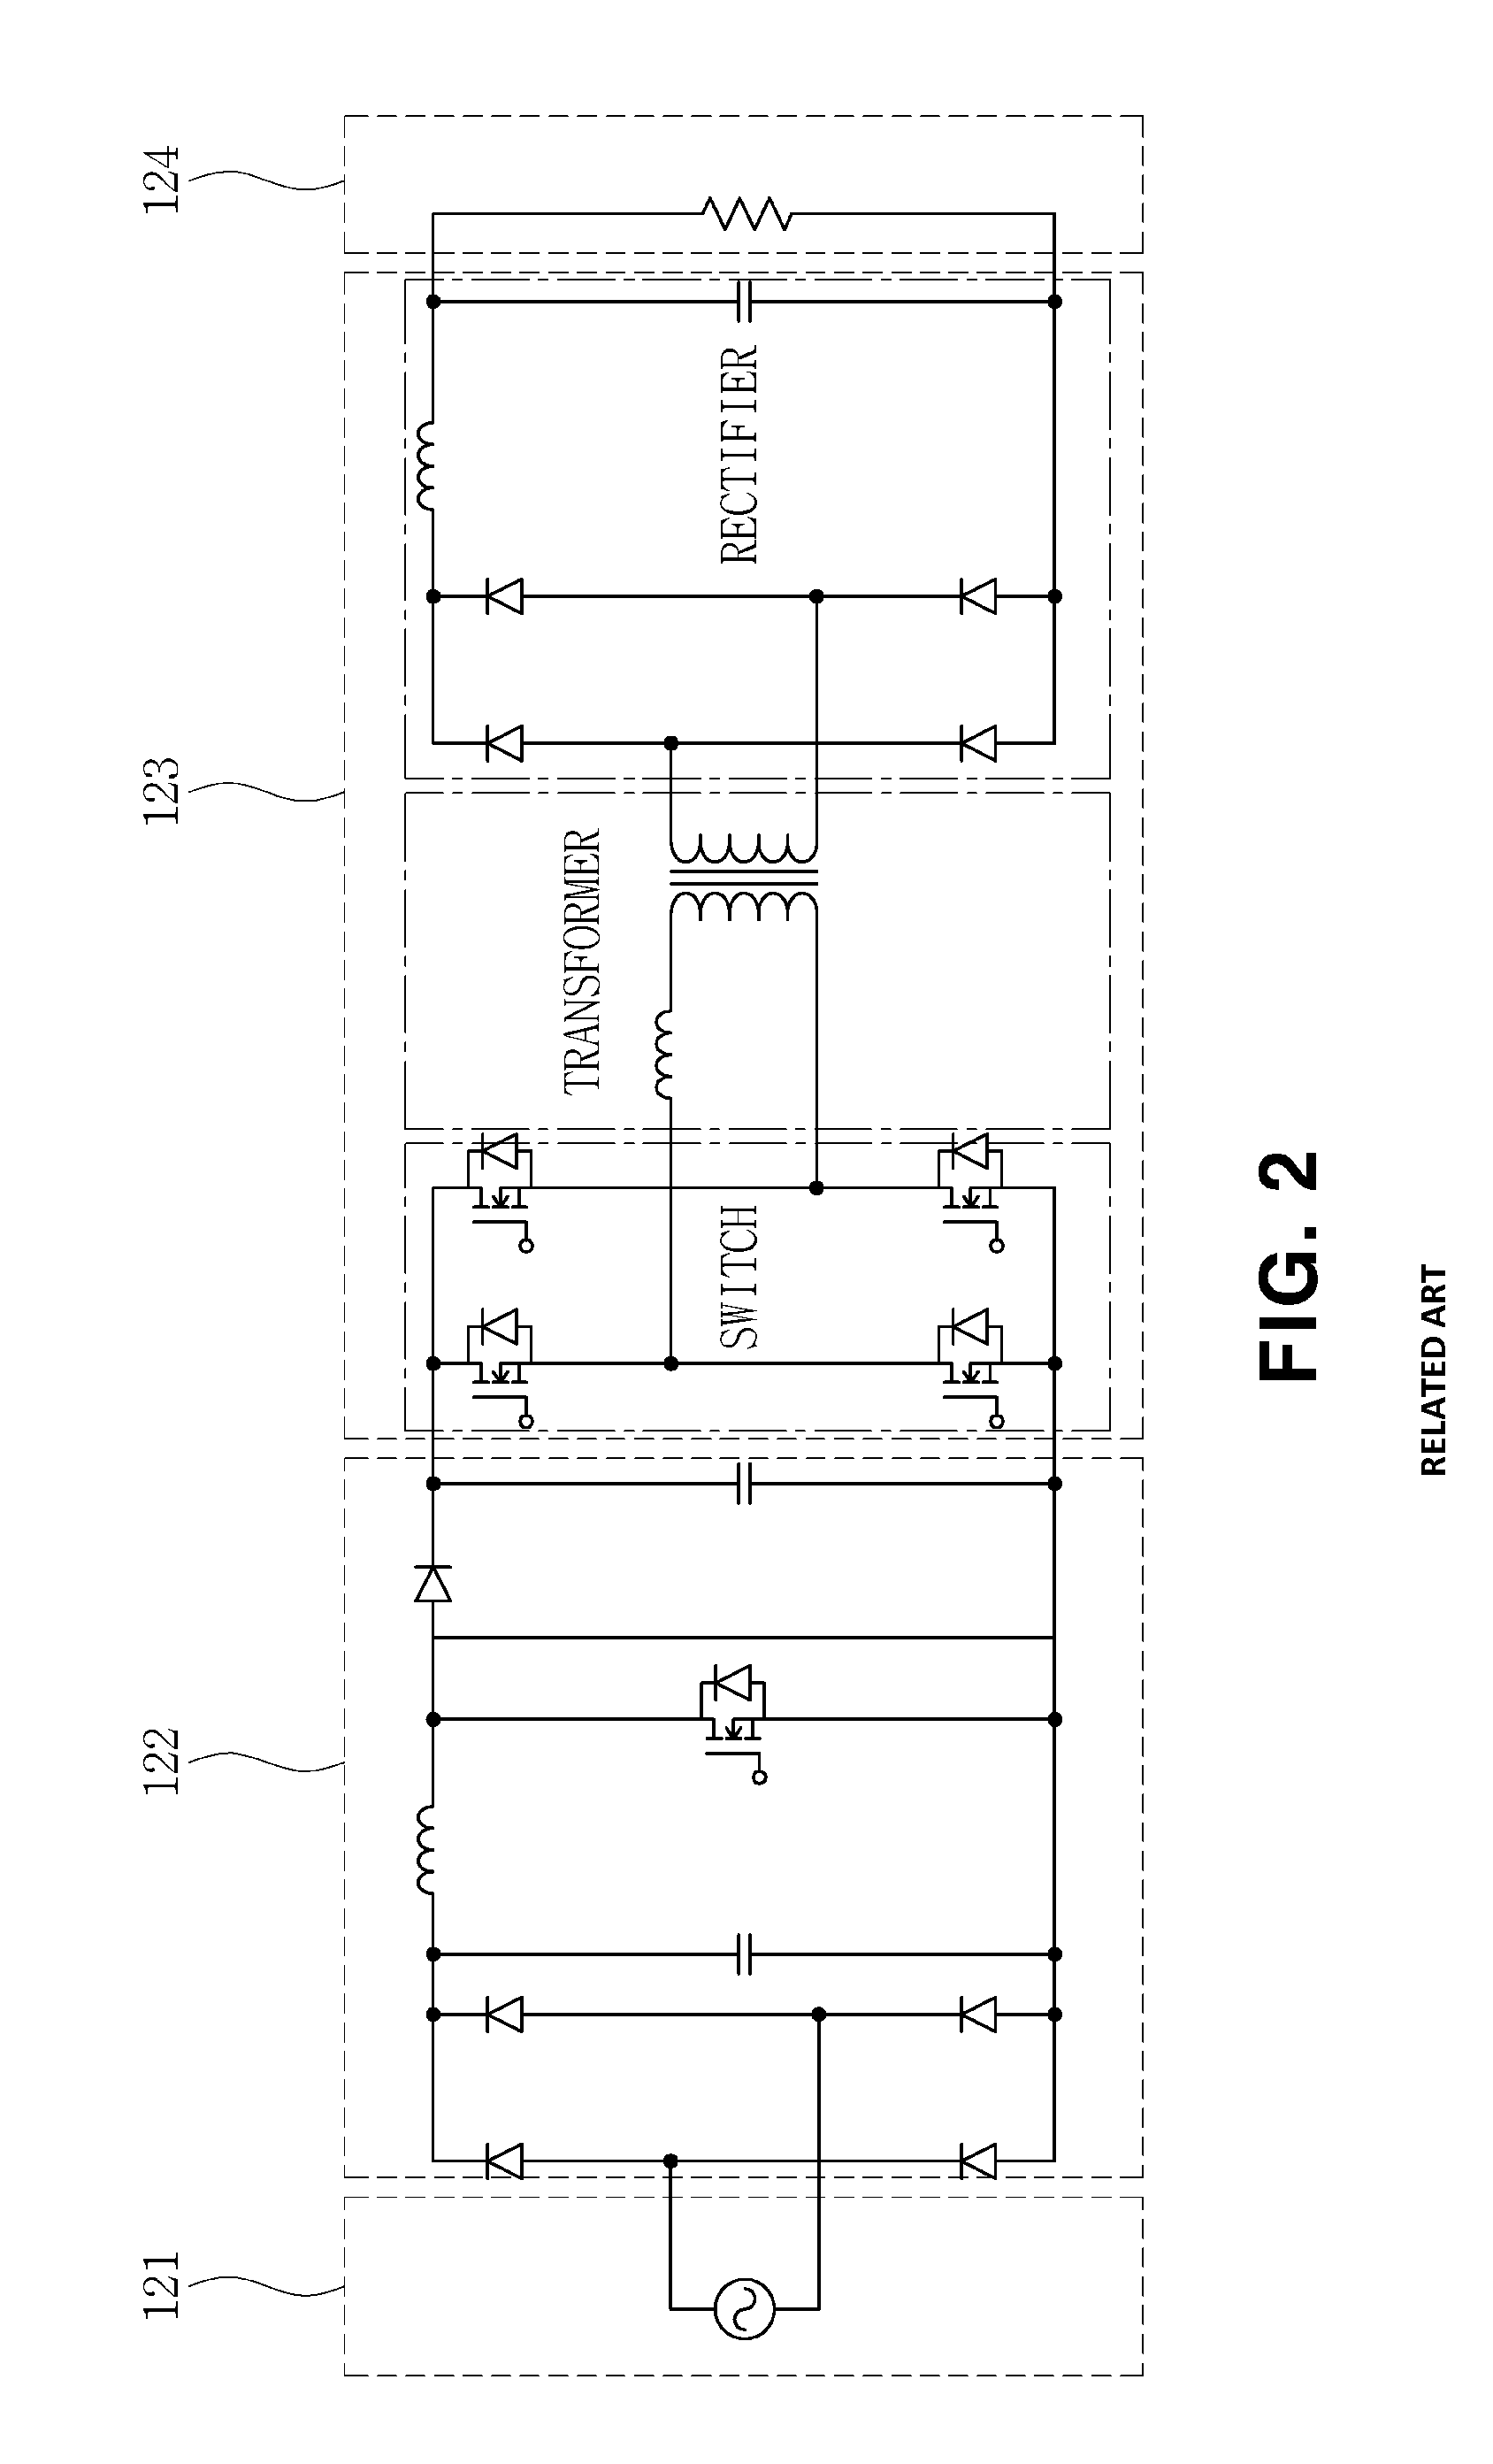 Magnetic connector apparatus for charging electric vehicle